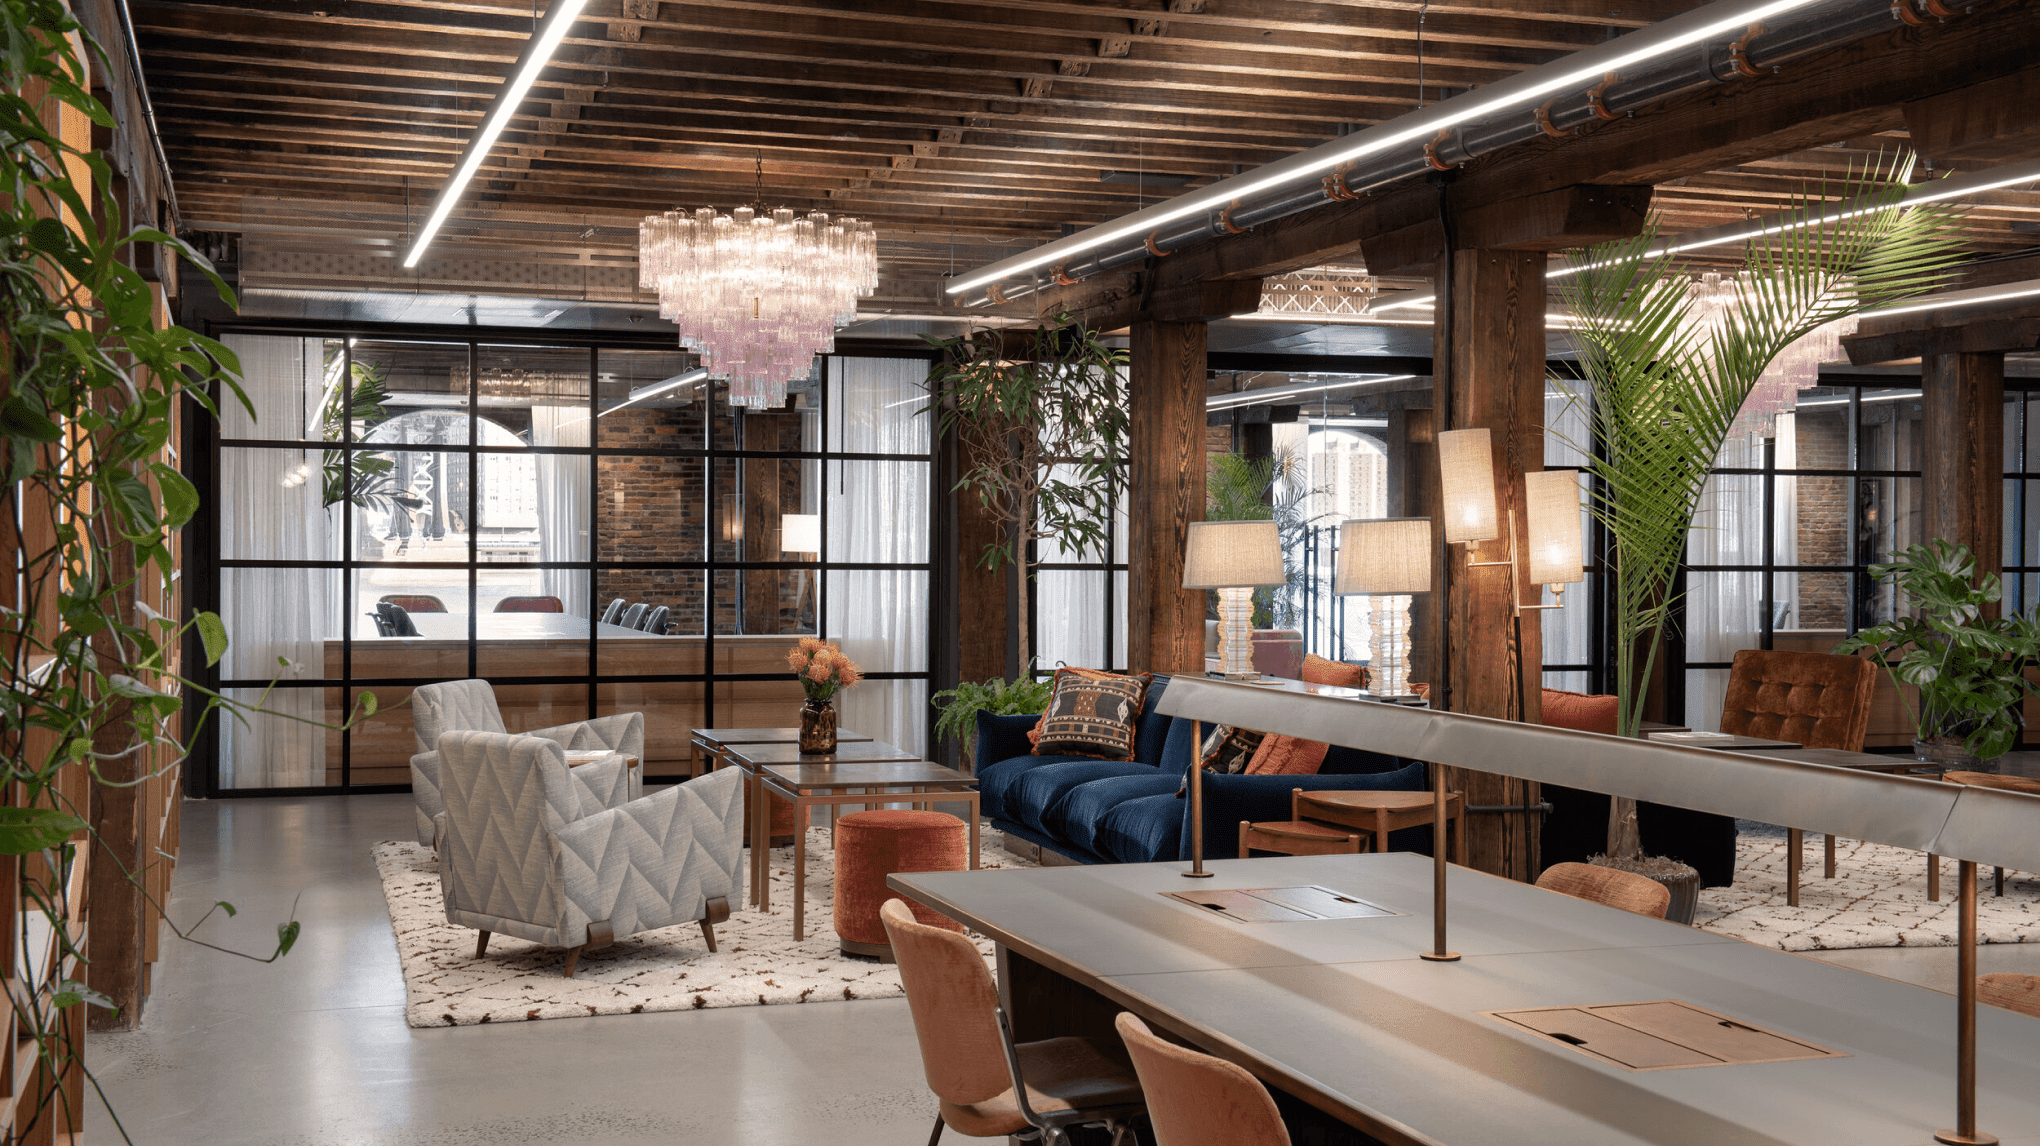 Our co-working space at Soho Works in Dumbo, Brooklyn, New York City